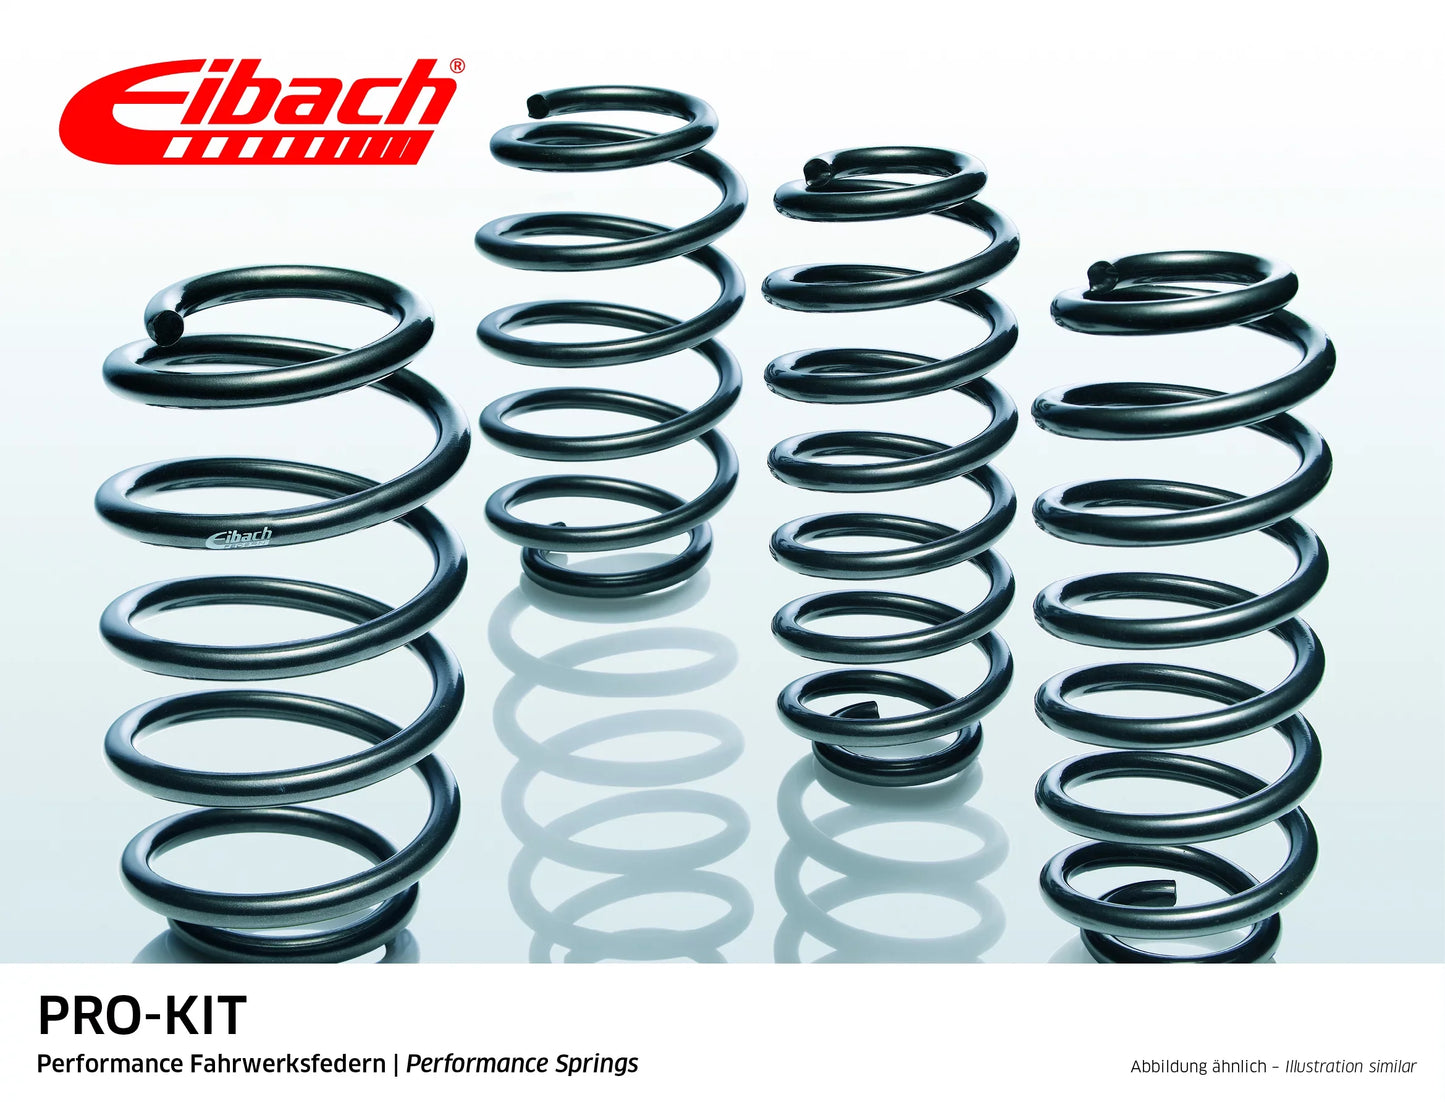 Eibach Pro-Kit Lowering Springs (E10-20-044-02-22) at £373.28